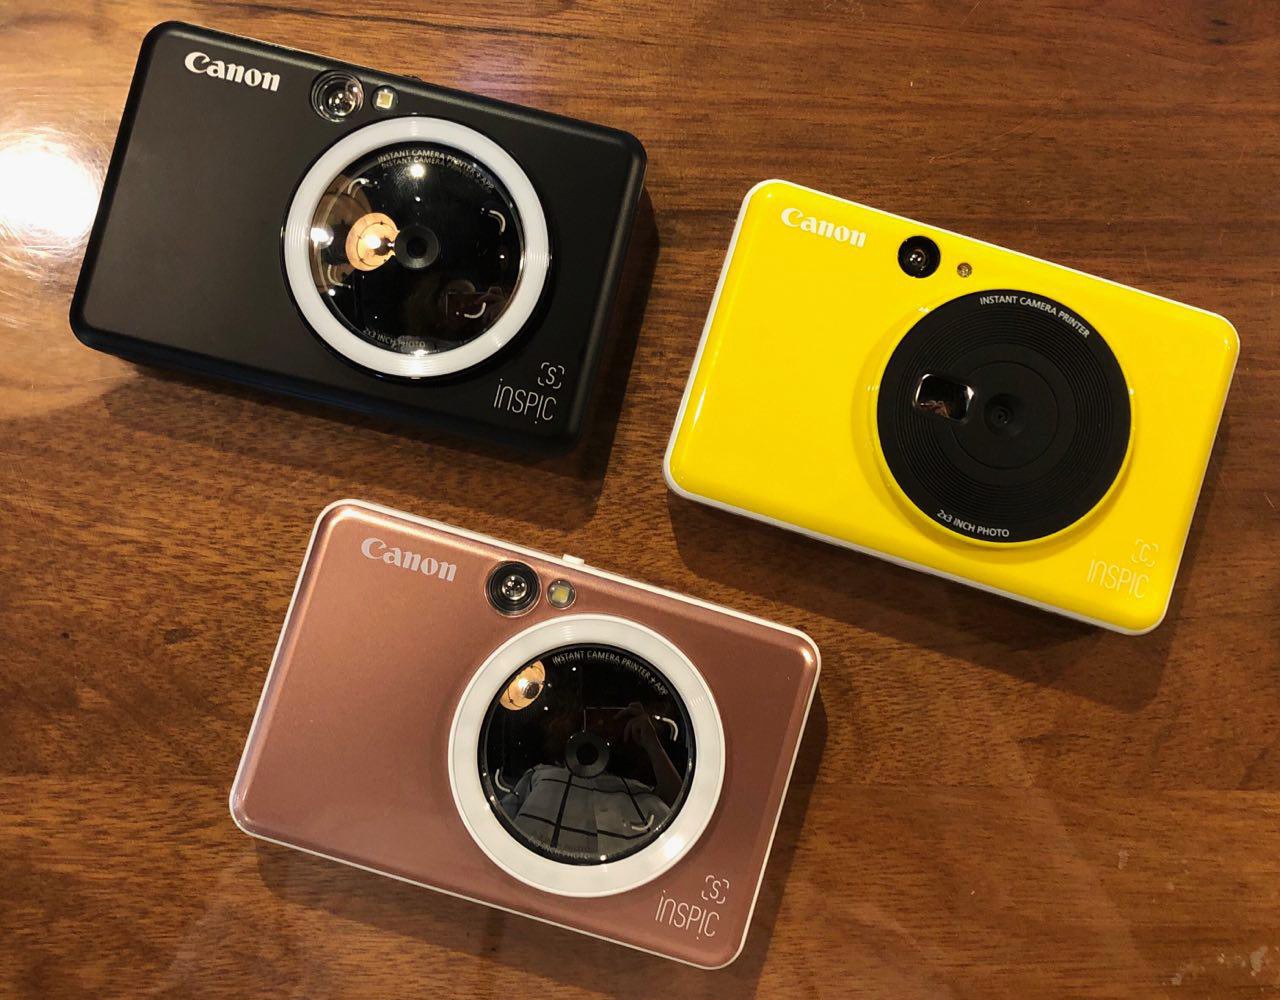 Canon Tweaks The Magic Of Instant Print With Their New iNSPiC [C 